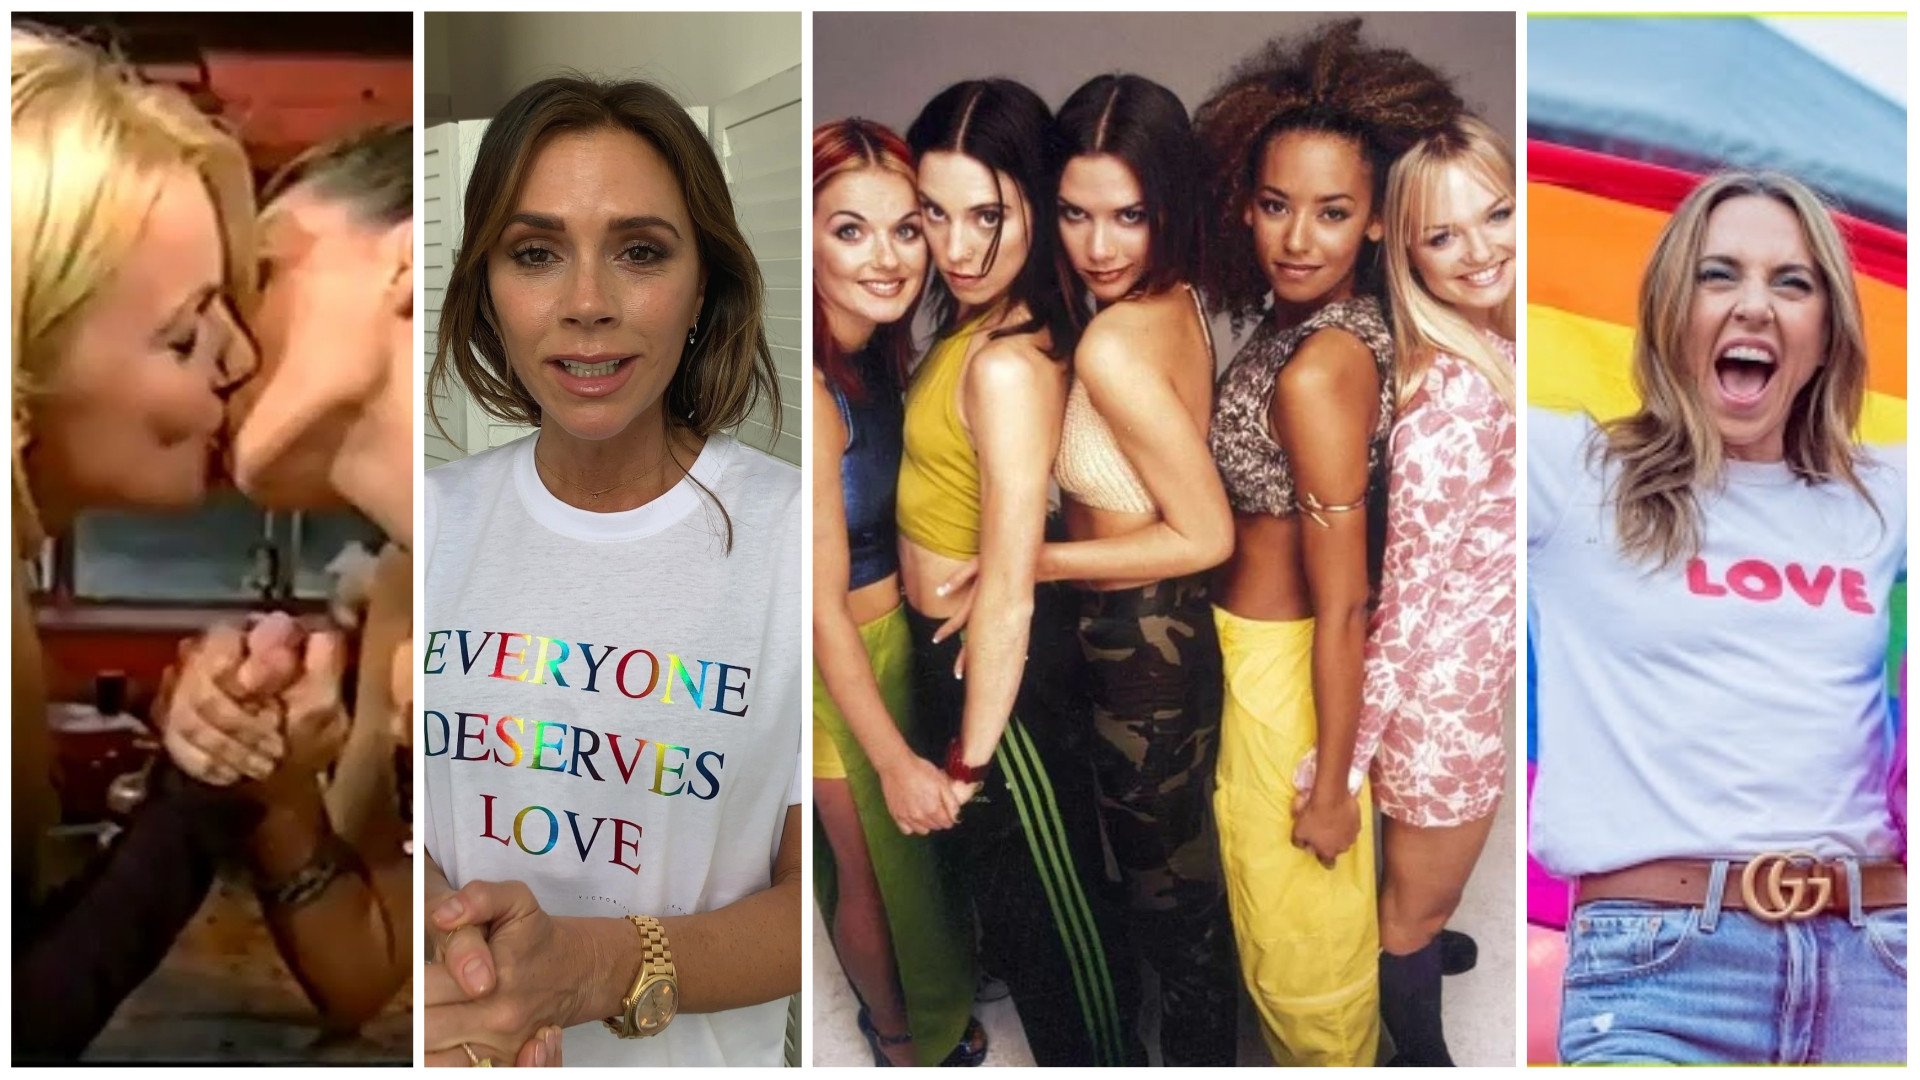 Here are 10 times the Spice Girls showed Pride over the years, from Geri Horner and Kylie Minogue’s TV kiss to Victoria Beckham’s Pride collection. Photos: YouTube, Handout, @victoriabeckham; @melaniecmusic/Instagram